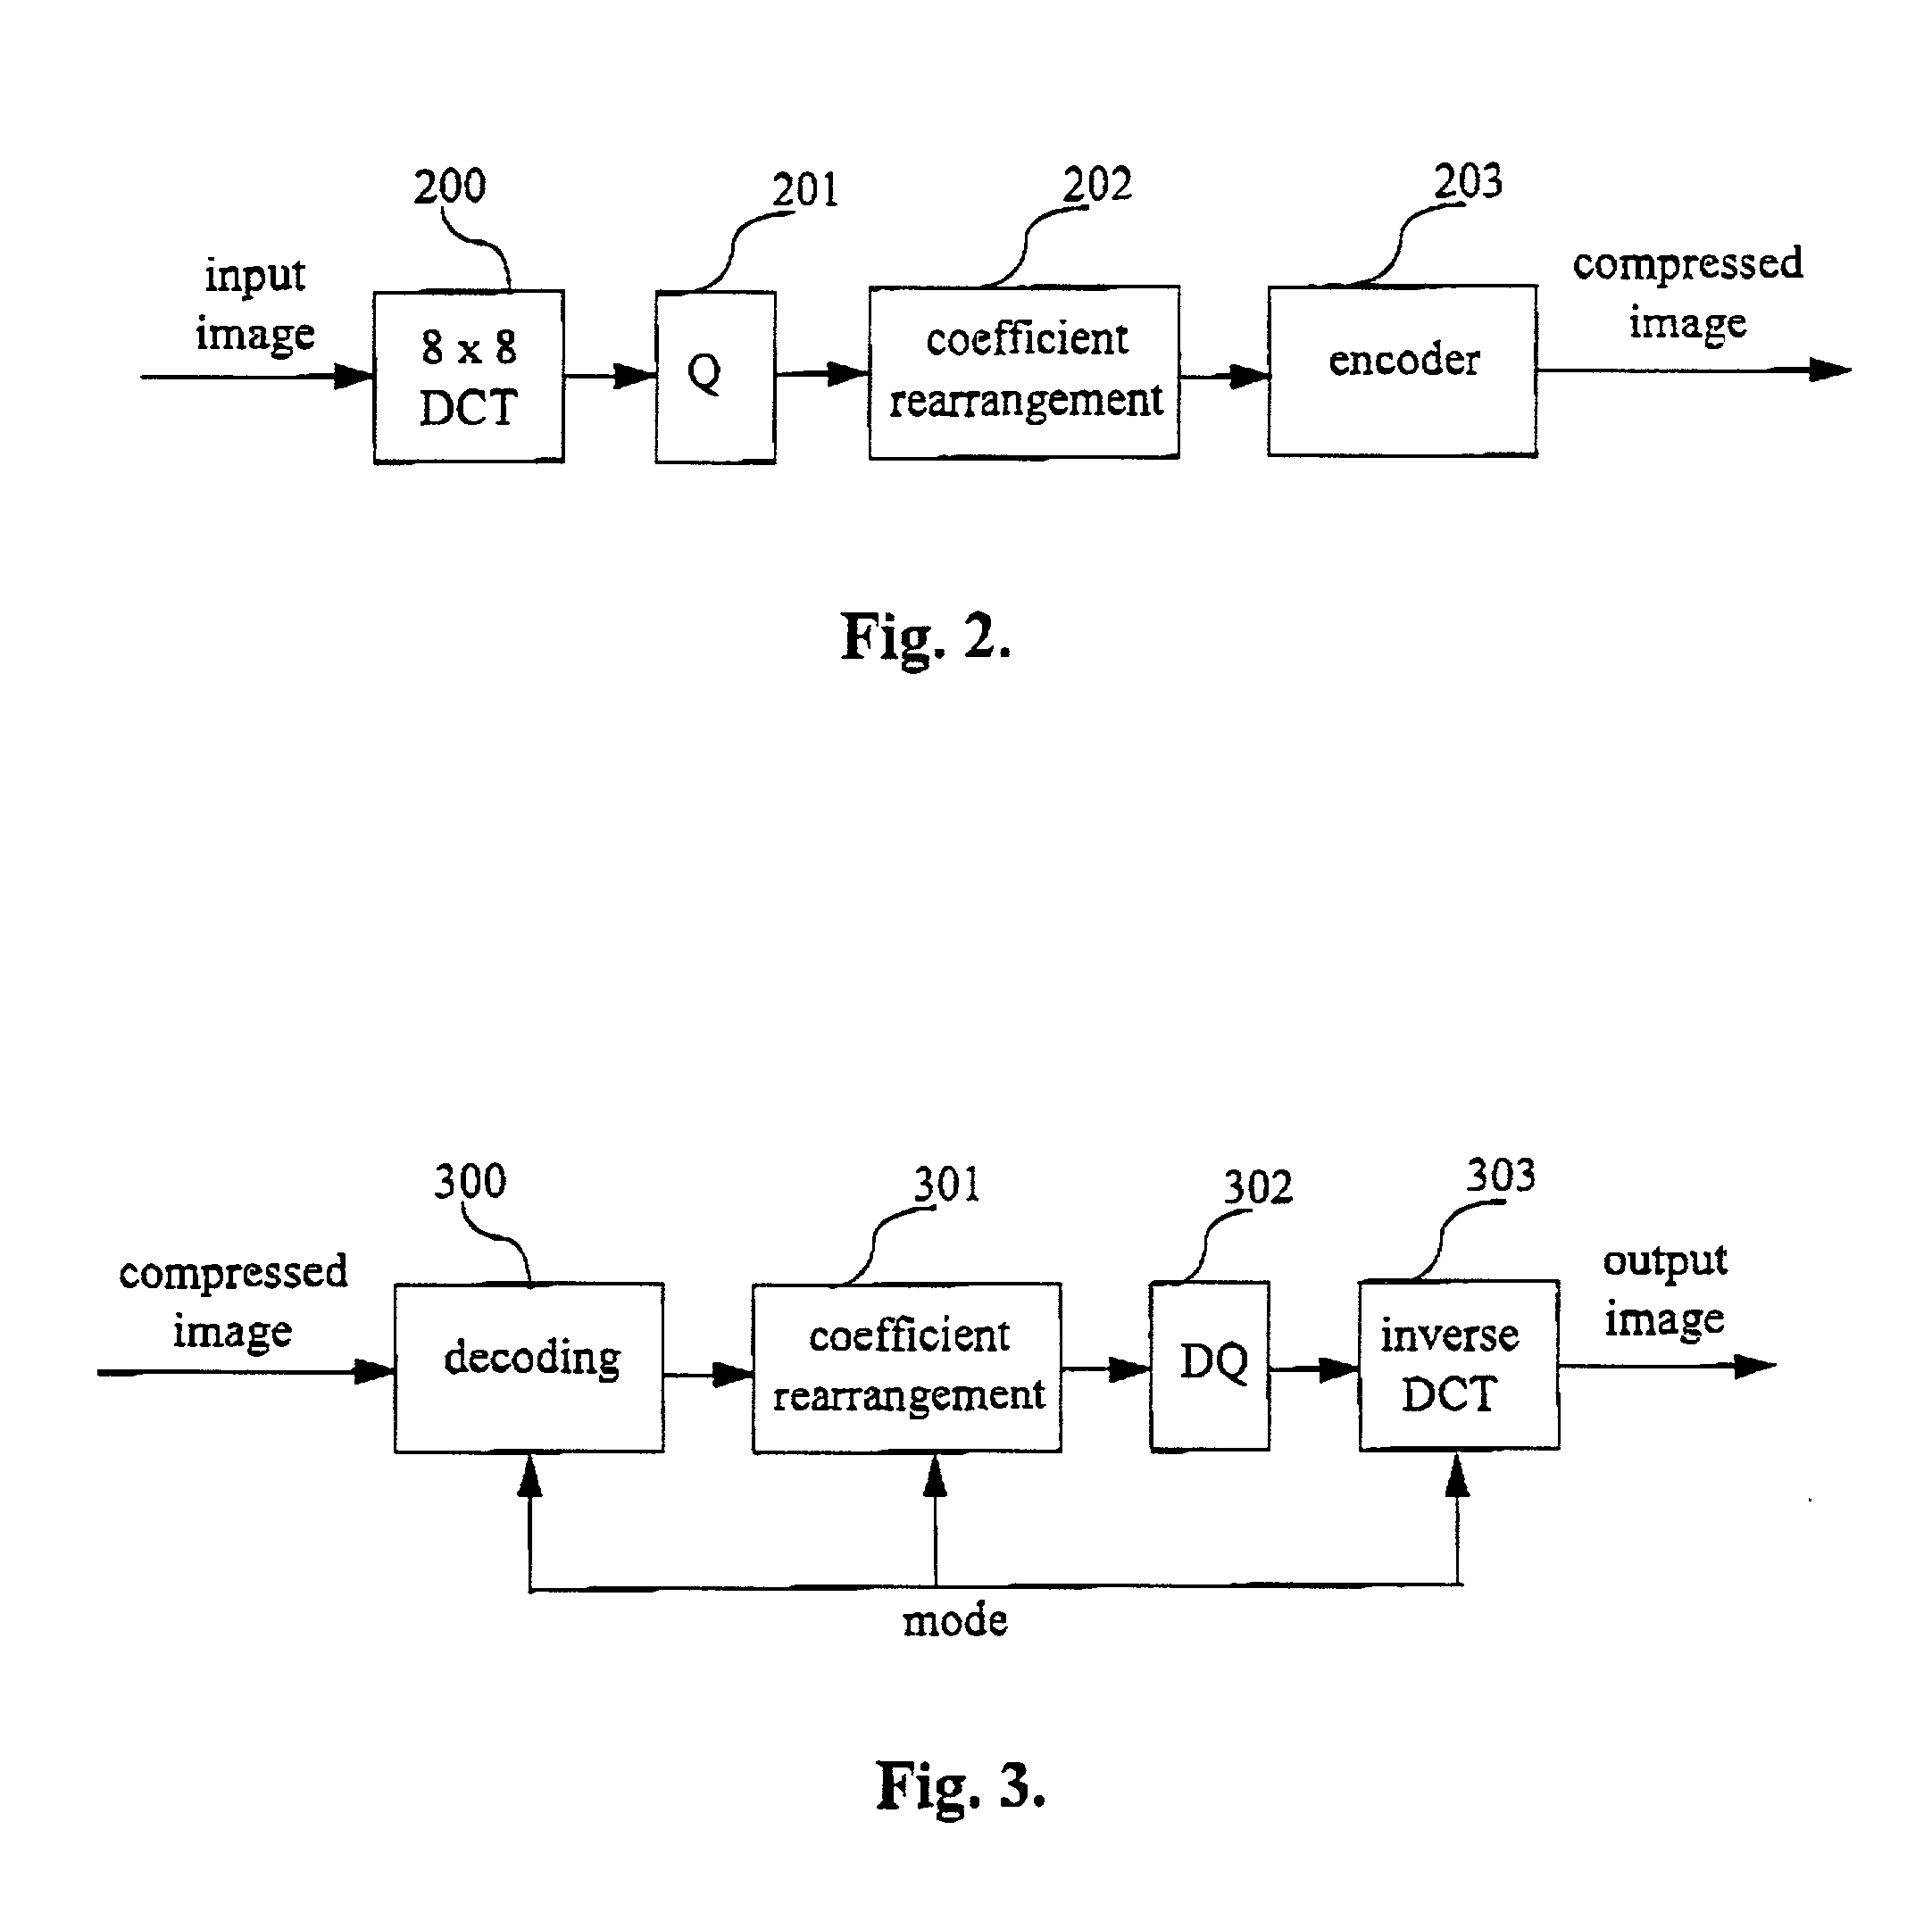 Method and apparatus for hierarchical encoding and decoding an image